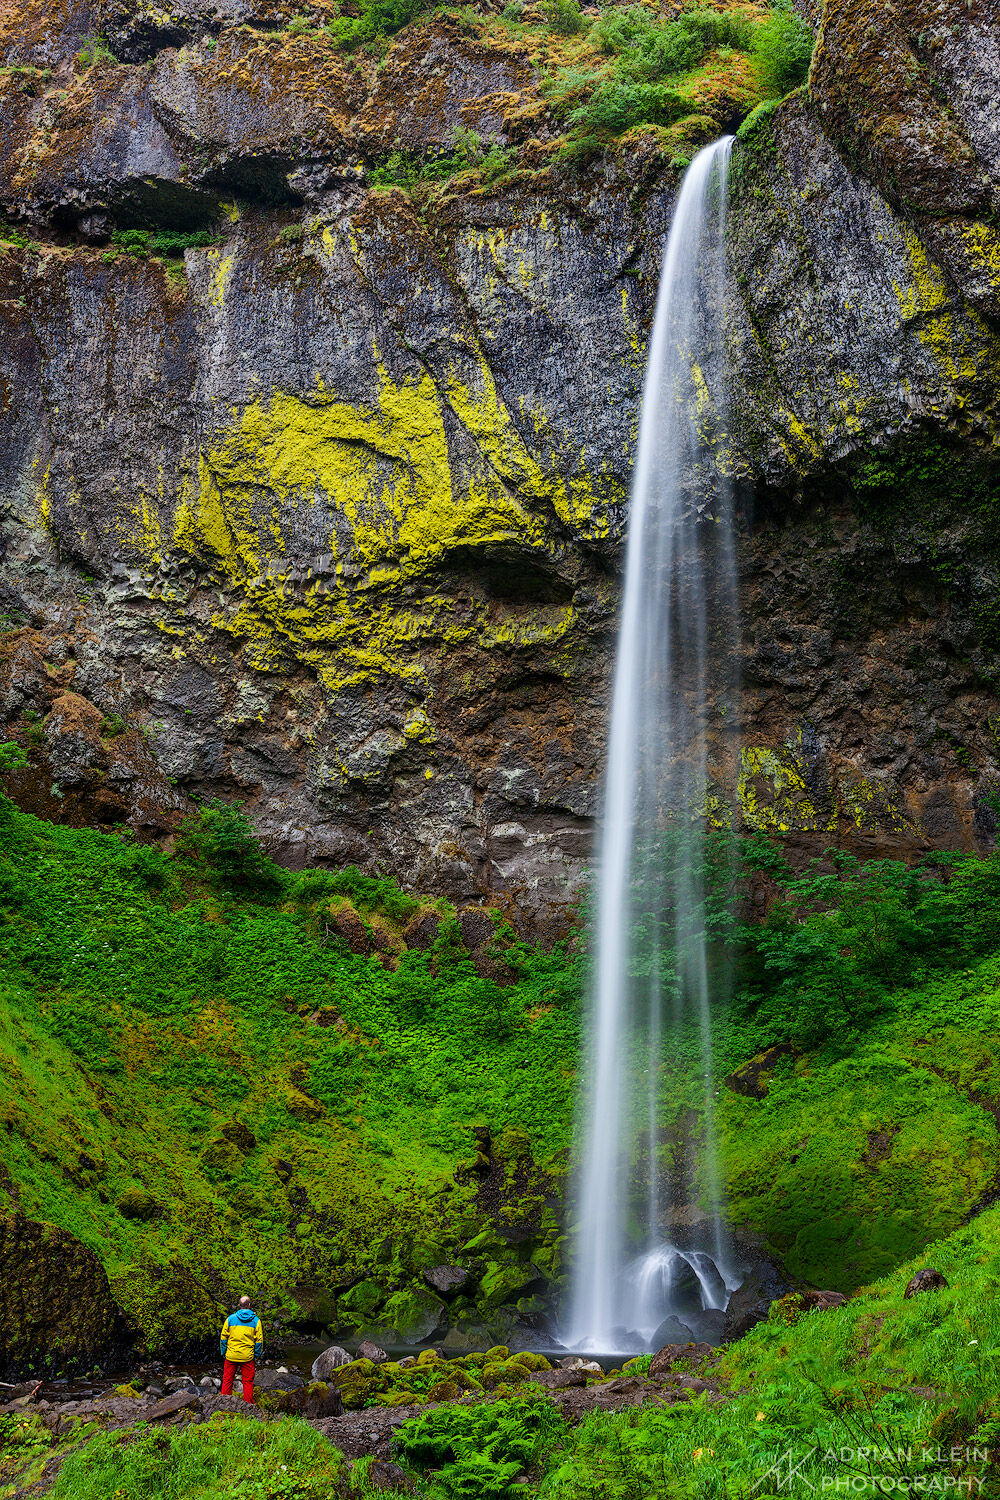 A hiker stands near the base of Elowah Falls in the Columbia River Gorge of Oregon showing the immense height of the falls.